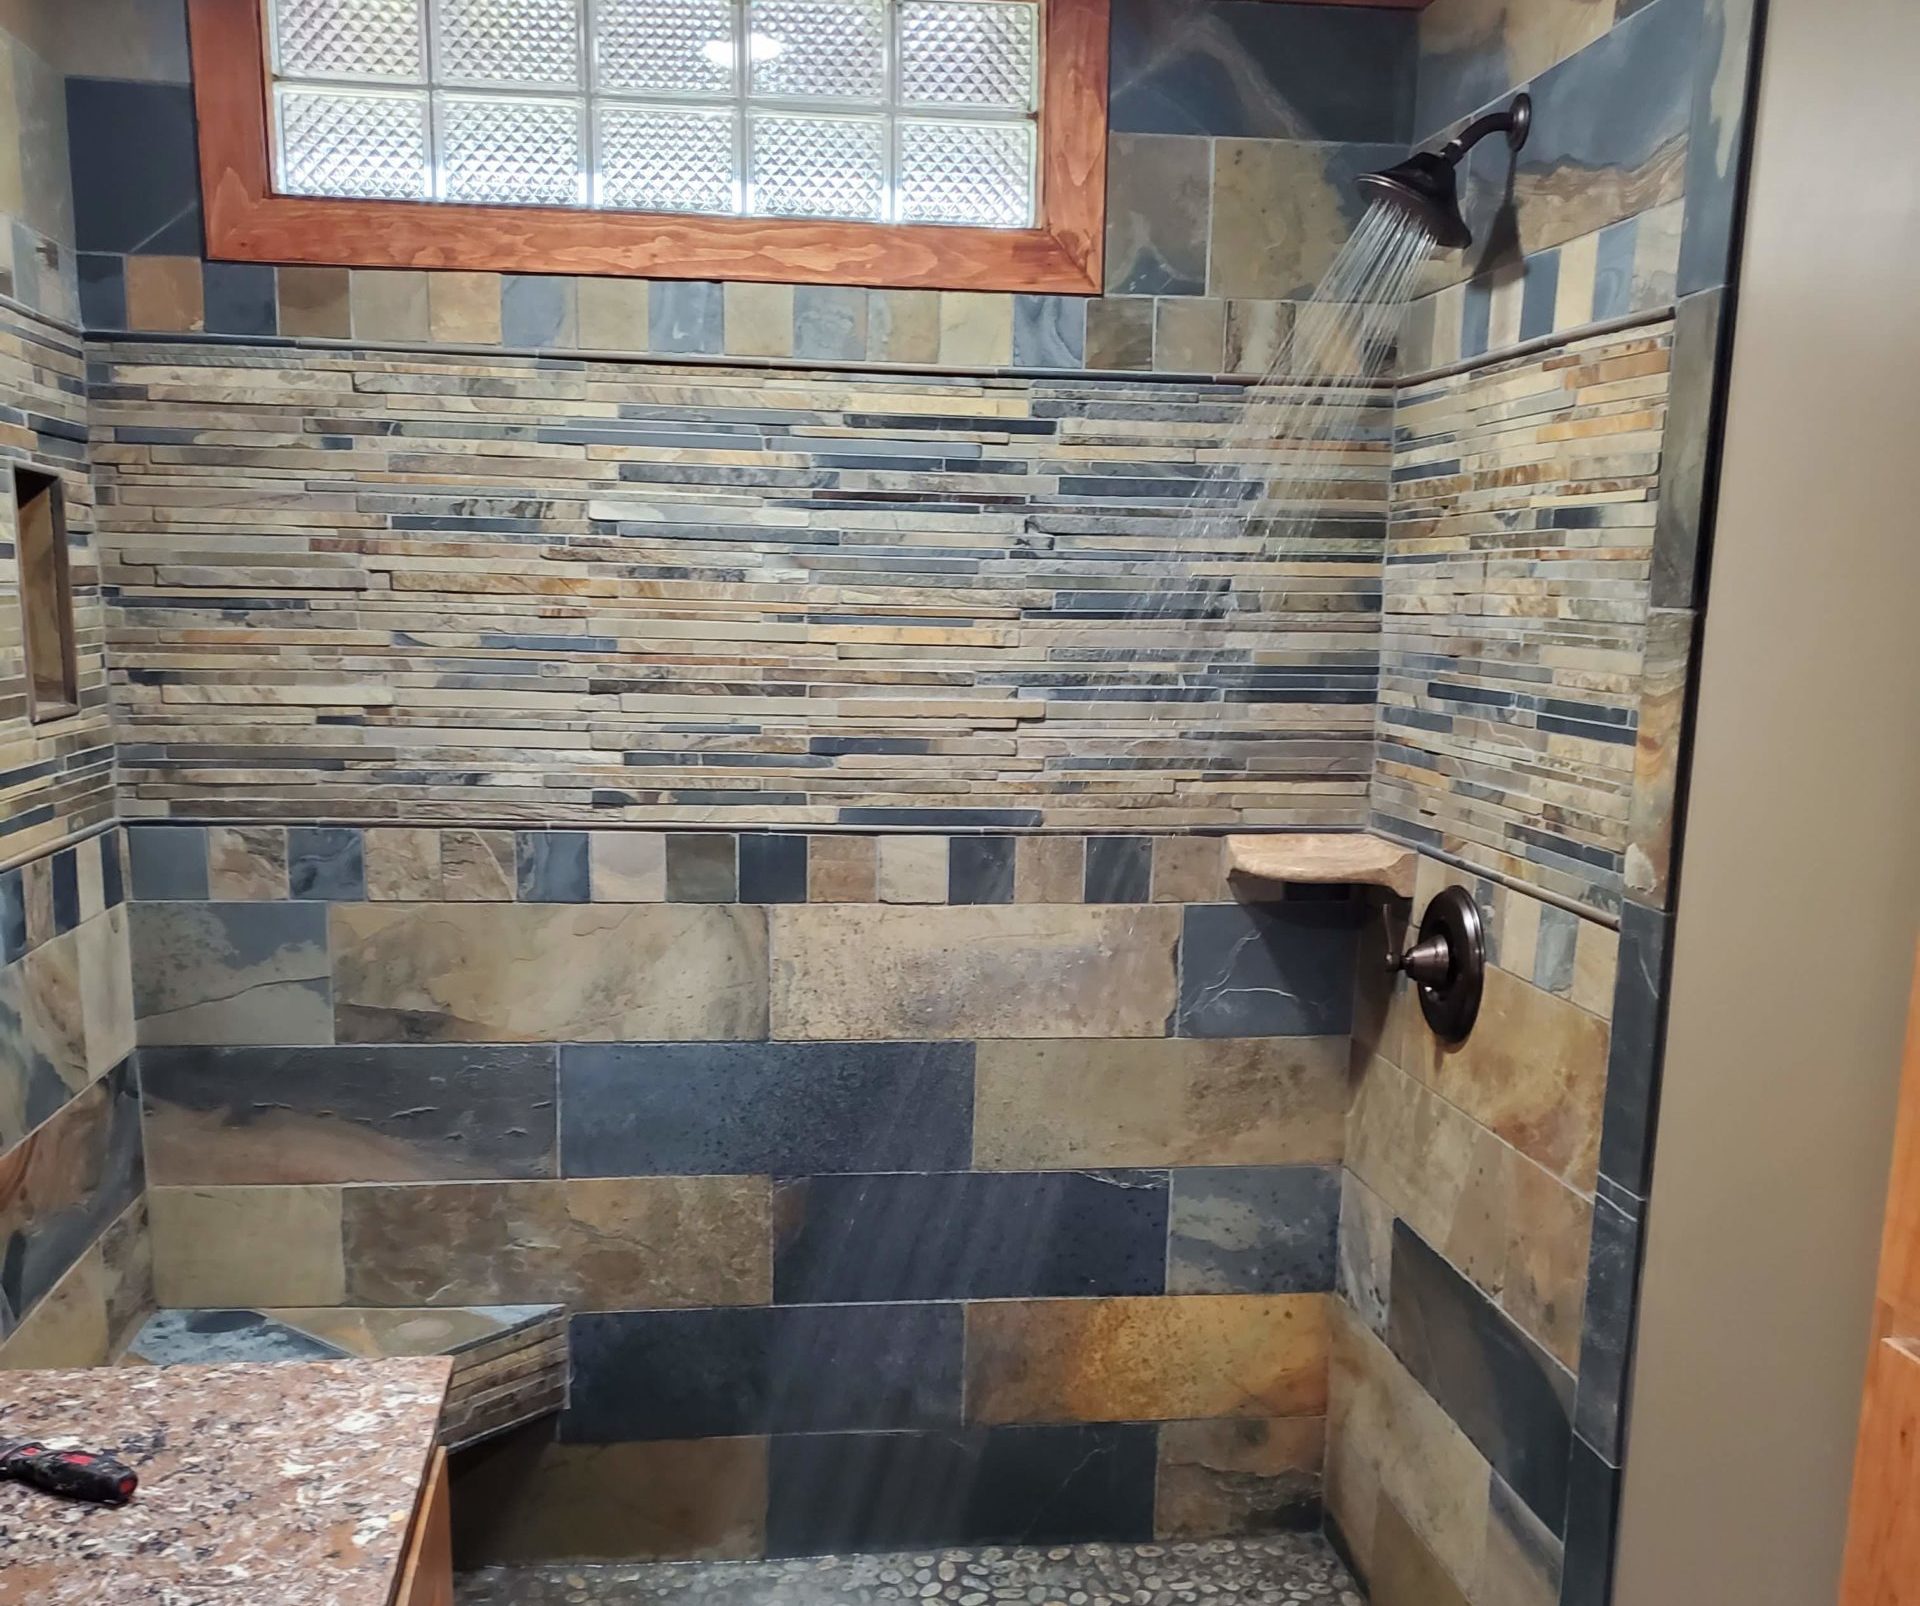 The interior of a modern bathroom with a shower box